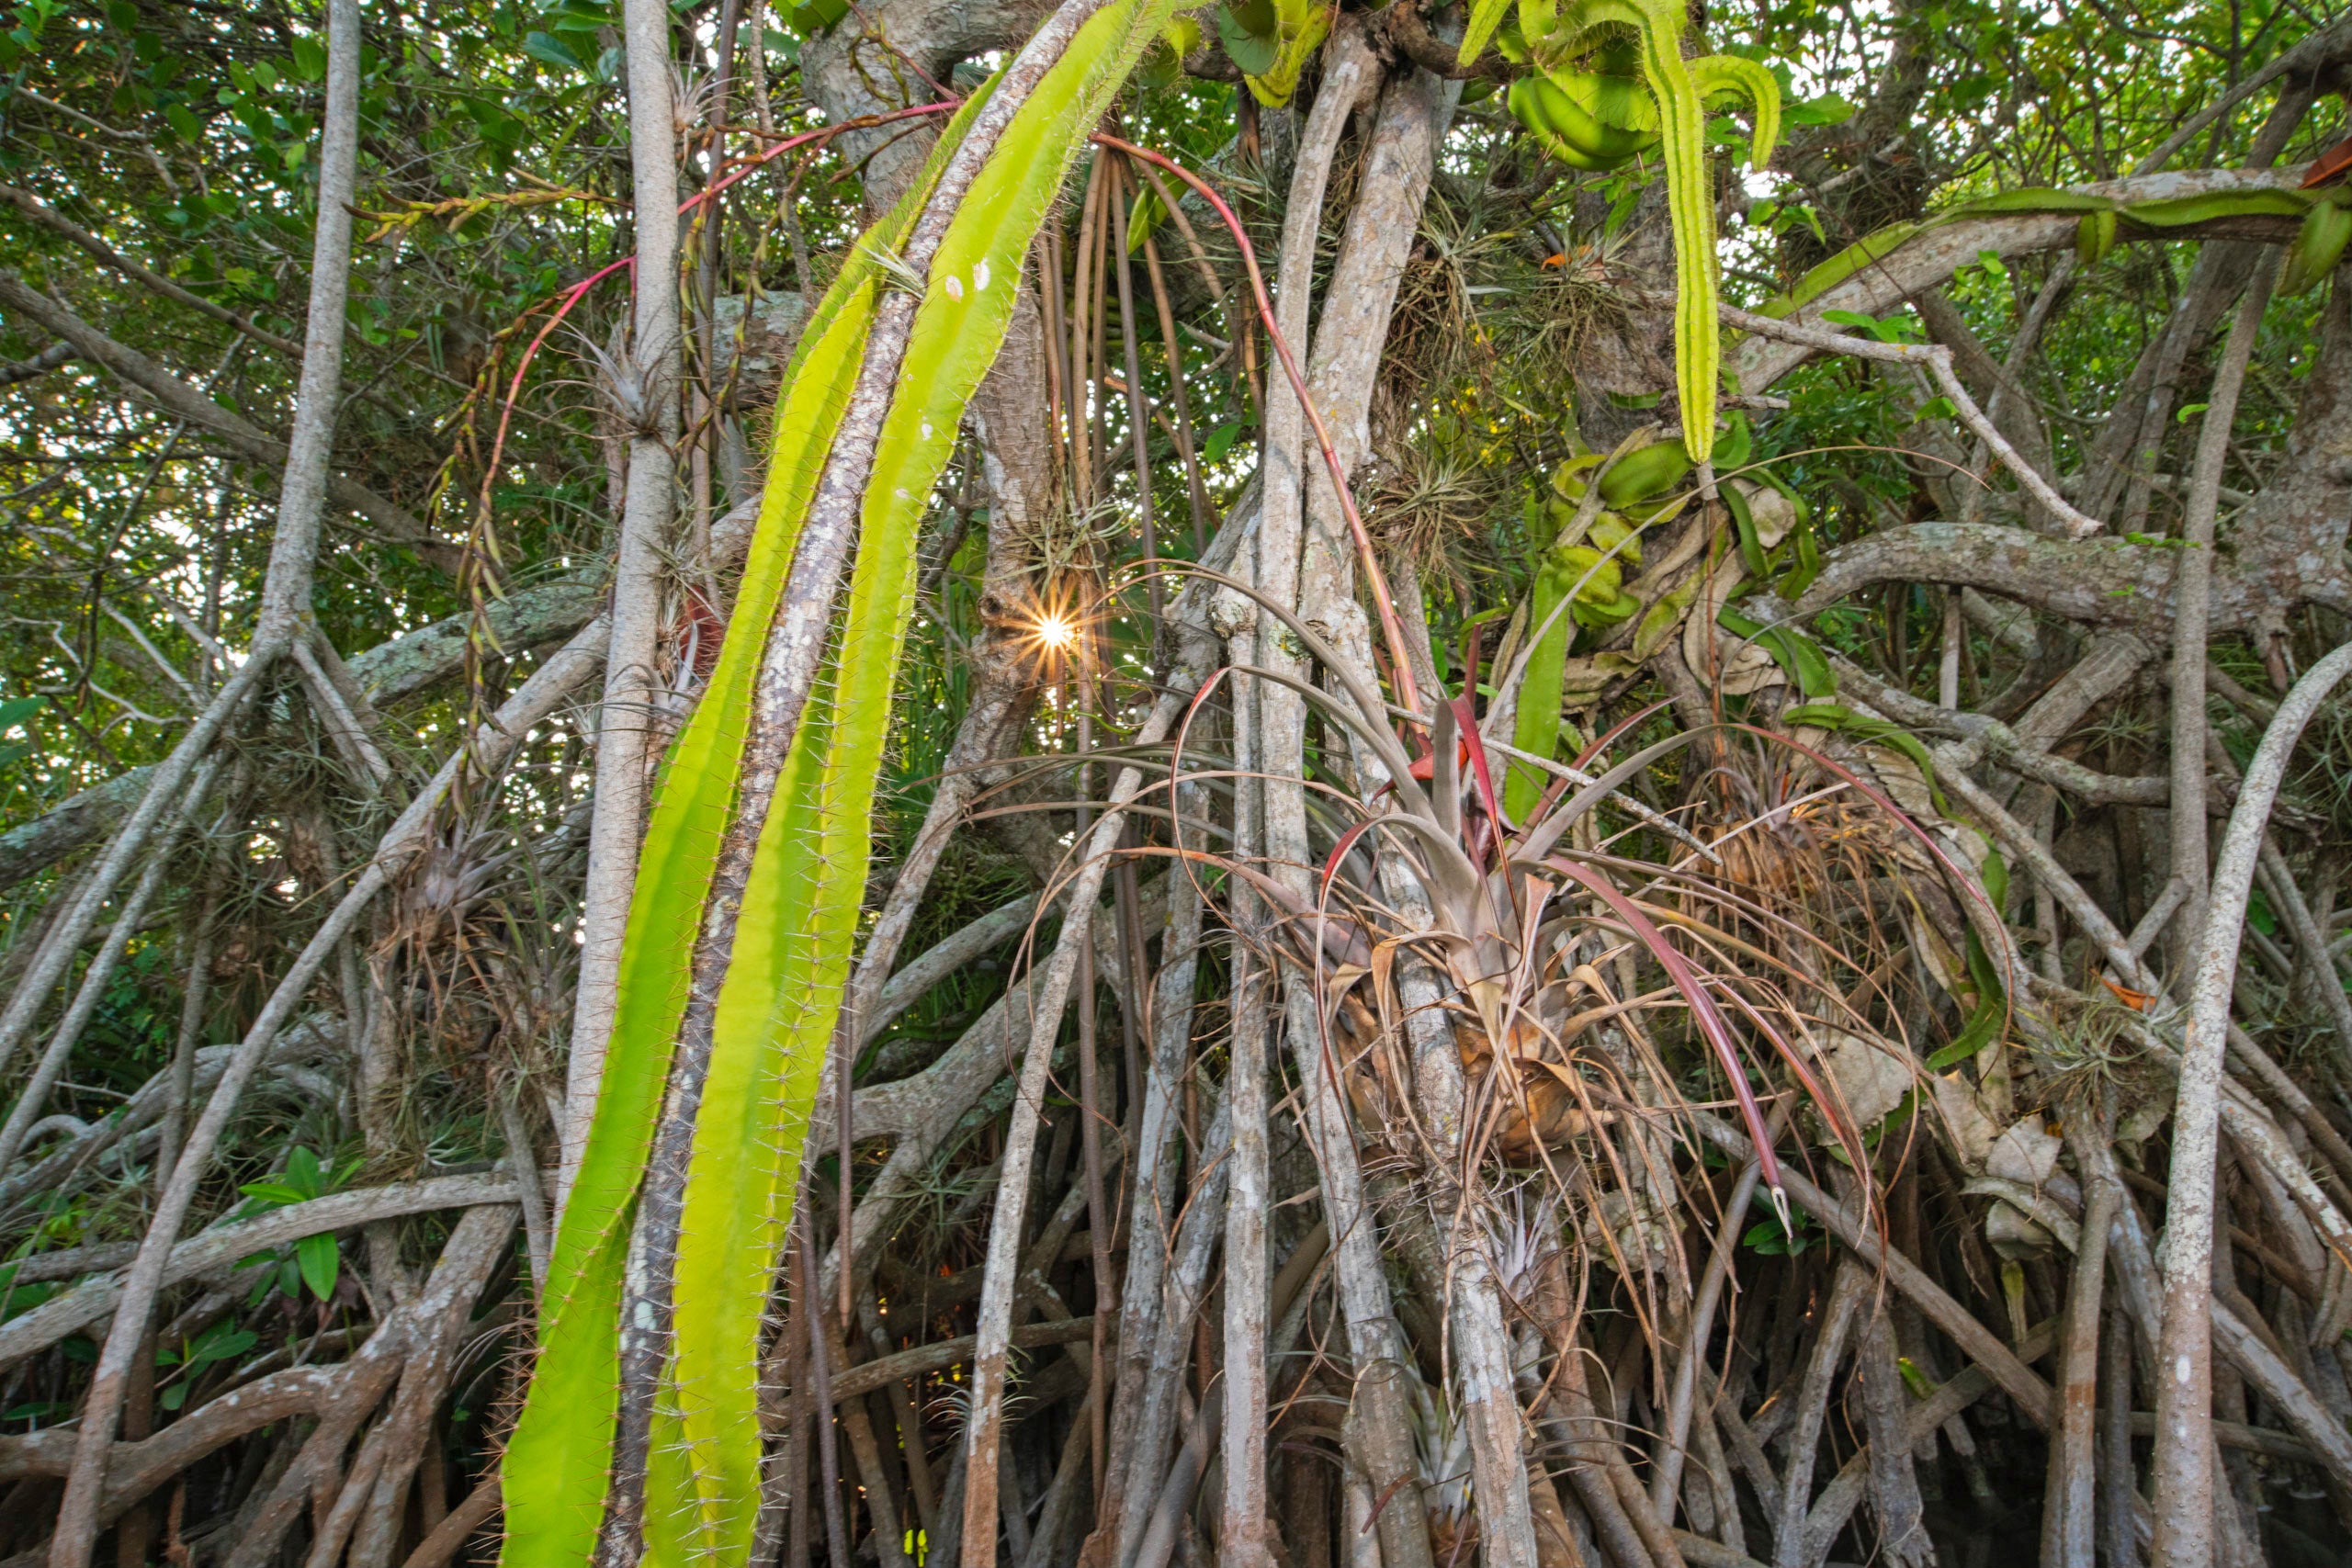 A tall red mangrove provides habitat to various epiphytic cacti and orchid species, creating an ecosystem unique in the world.  (Photo: Octavio Aburto)